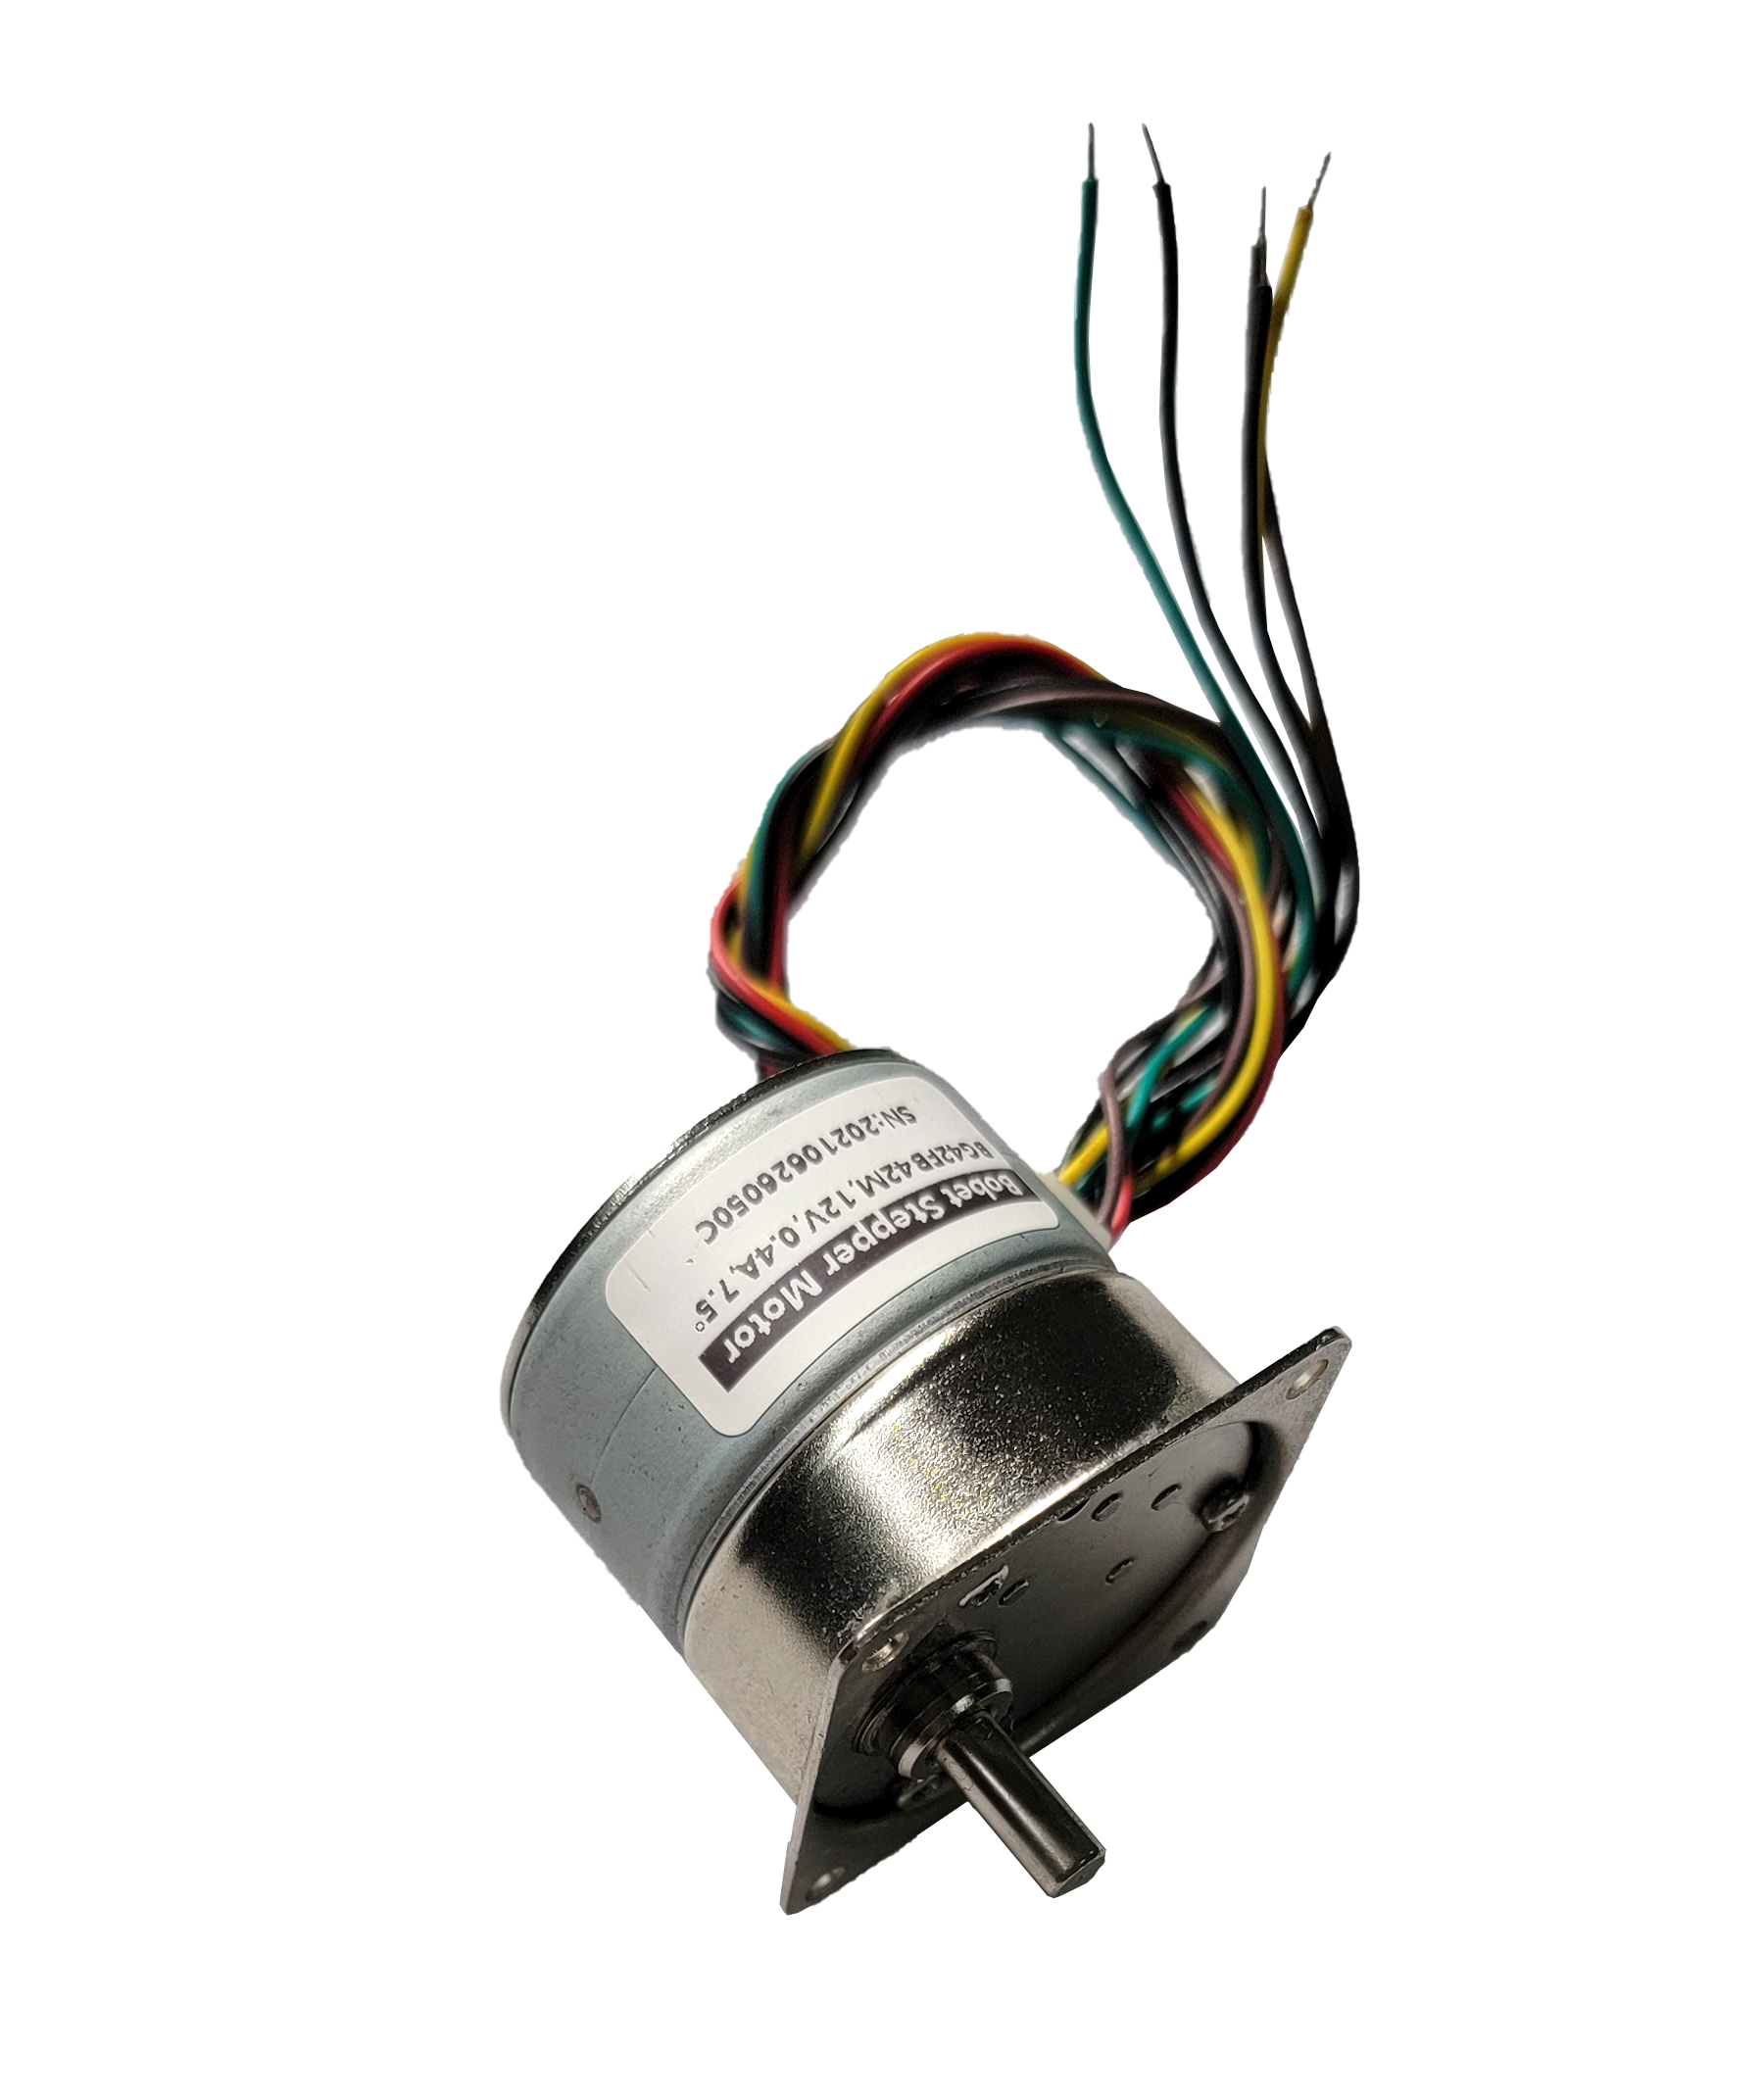 wholesale Three Phase Bldc Motor –  0.4A phase current 42mm stepper motor with gear box , 8kg.cm holding torque – Bobet